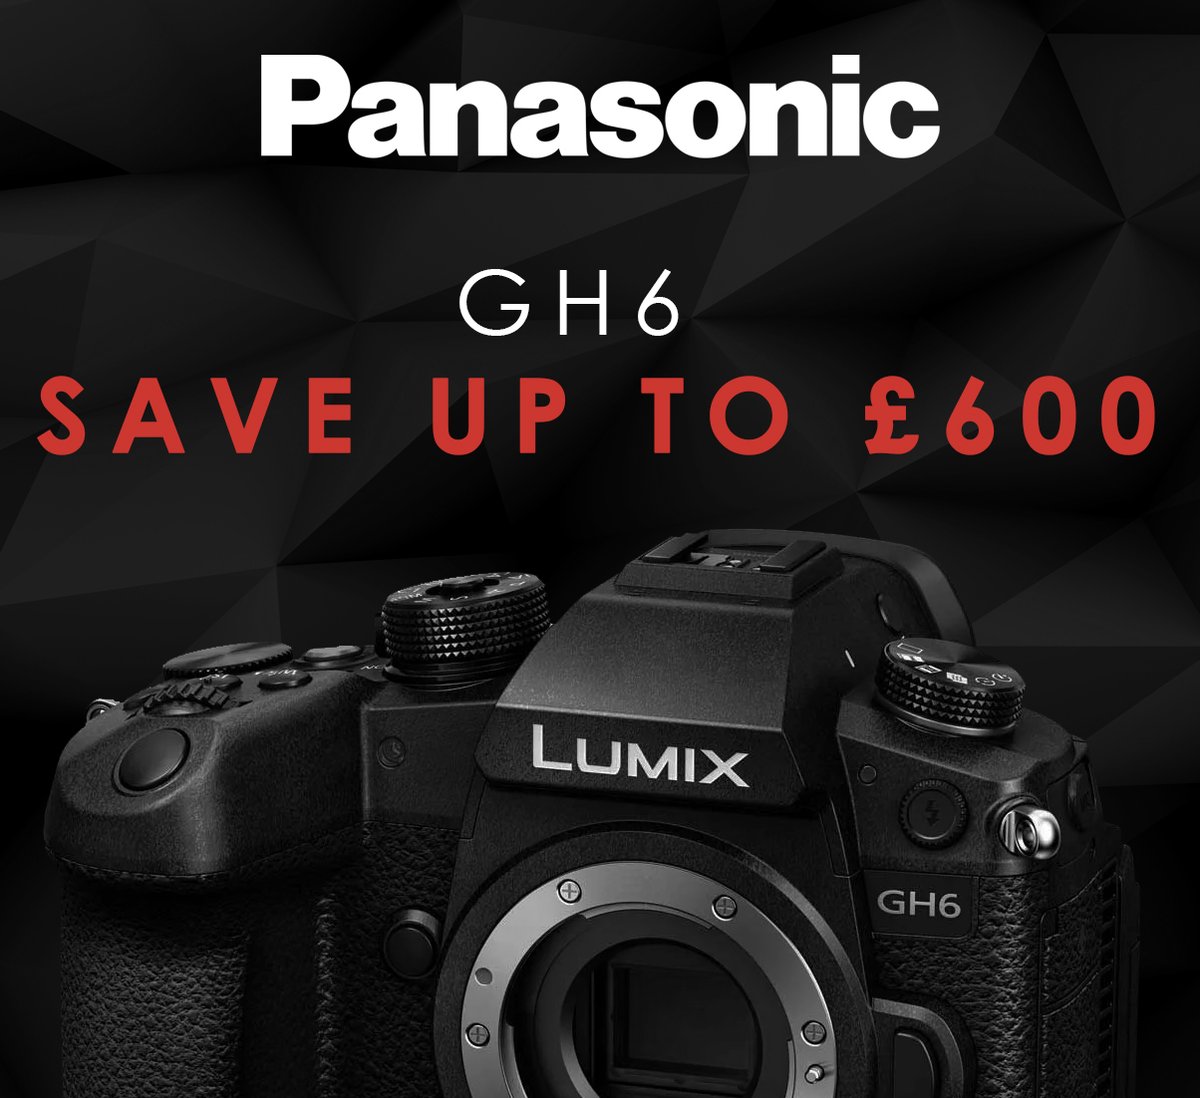 💥 Save up to £600 on the Panasonic GH6! 💥 View deal on our website: bit.ly/3SPDRGP